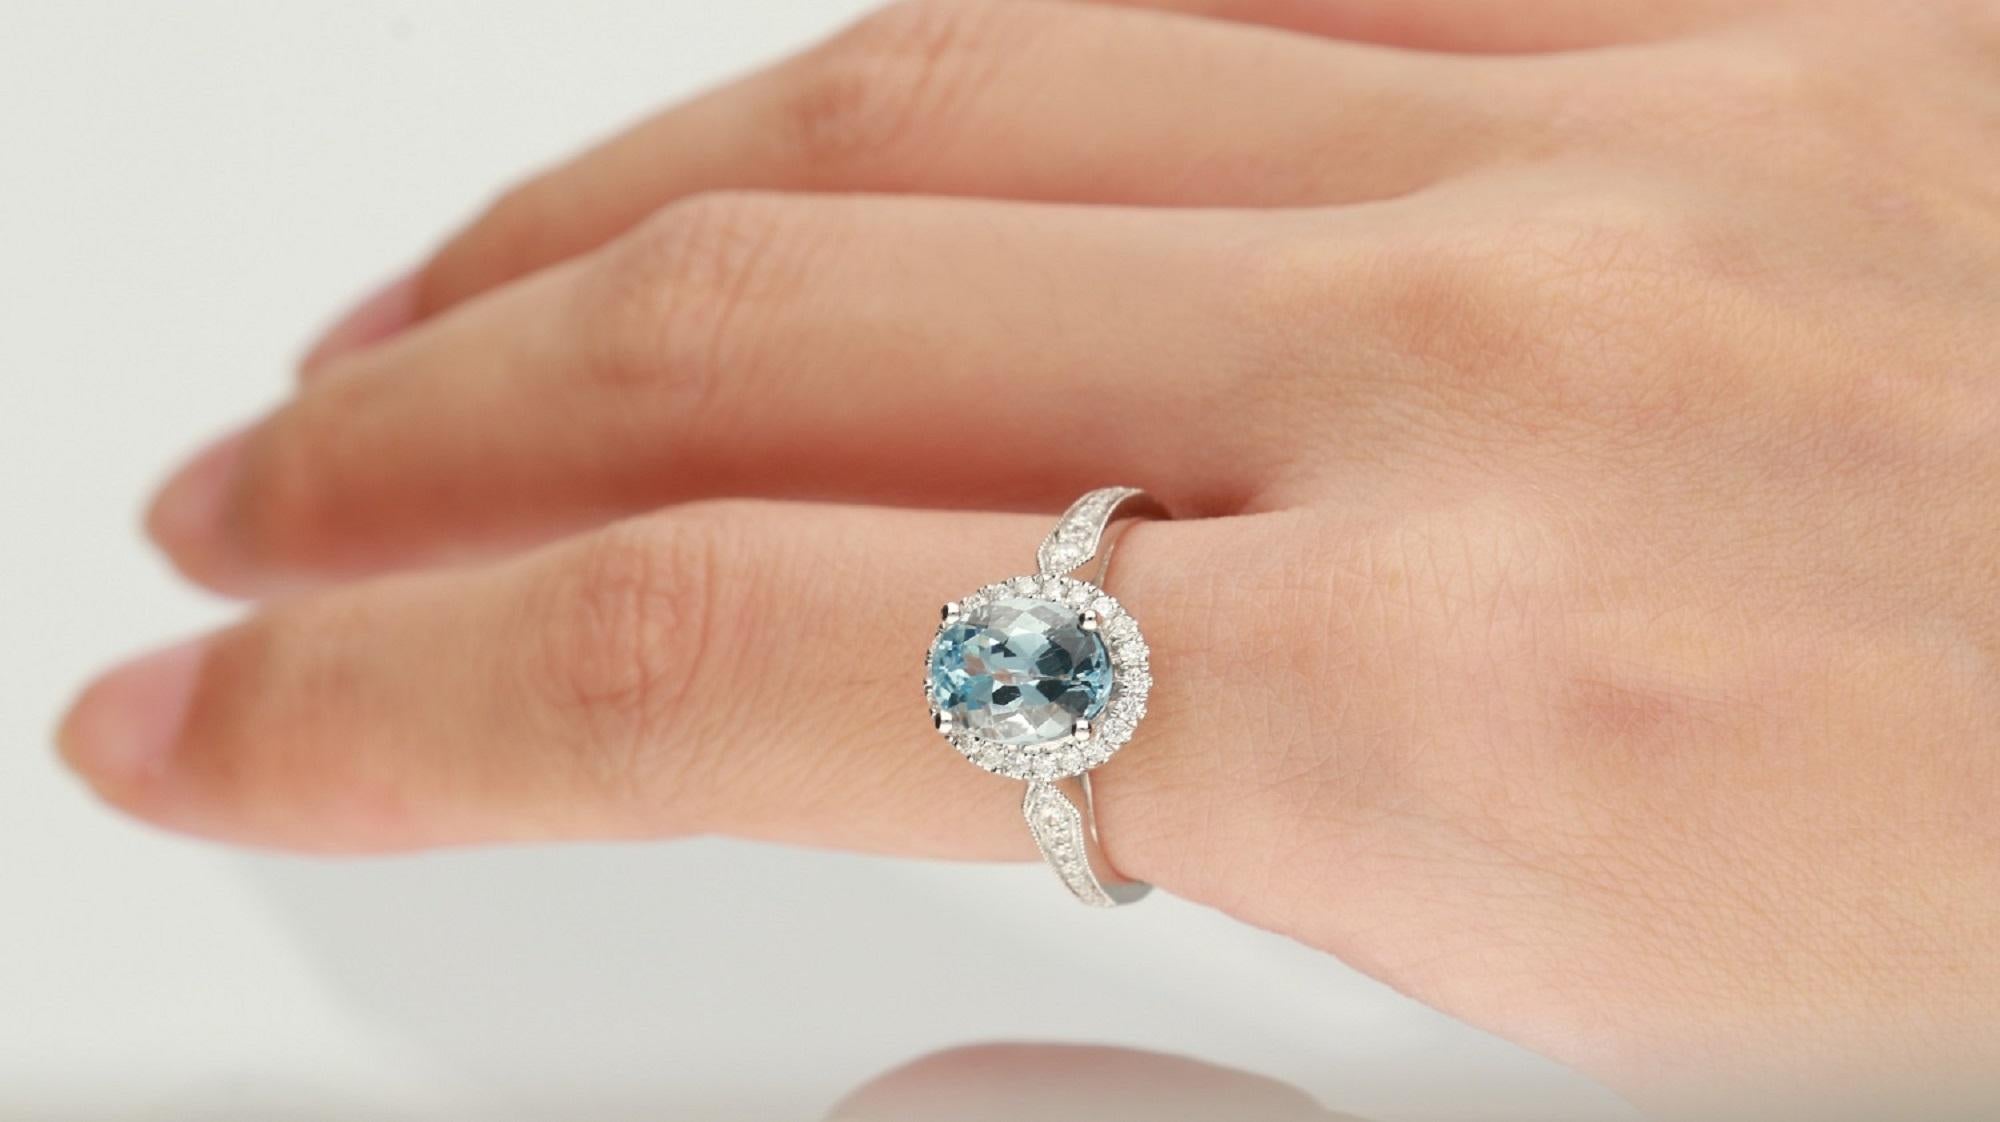 Stunning, timeless and classy eternity Unique Ring. Decorate yourself in luxury with this Gin & Grace Ring. The 14K White Gold jewelry boasts Oval-Shape Prong Setting Genuine Aquamarine (1 pc) 1.71 Carat along with Natural Round cut white Diamond